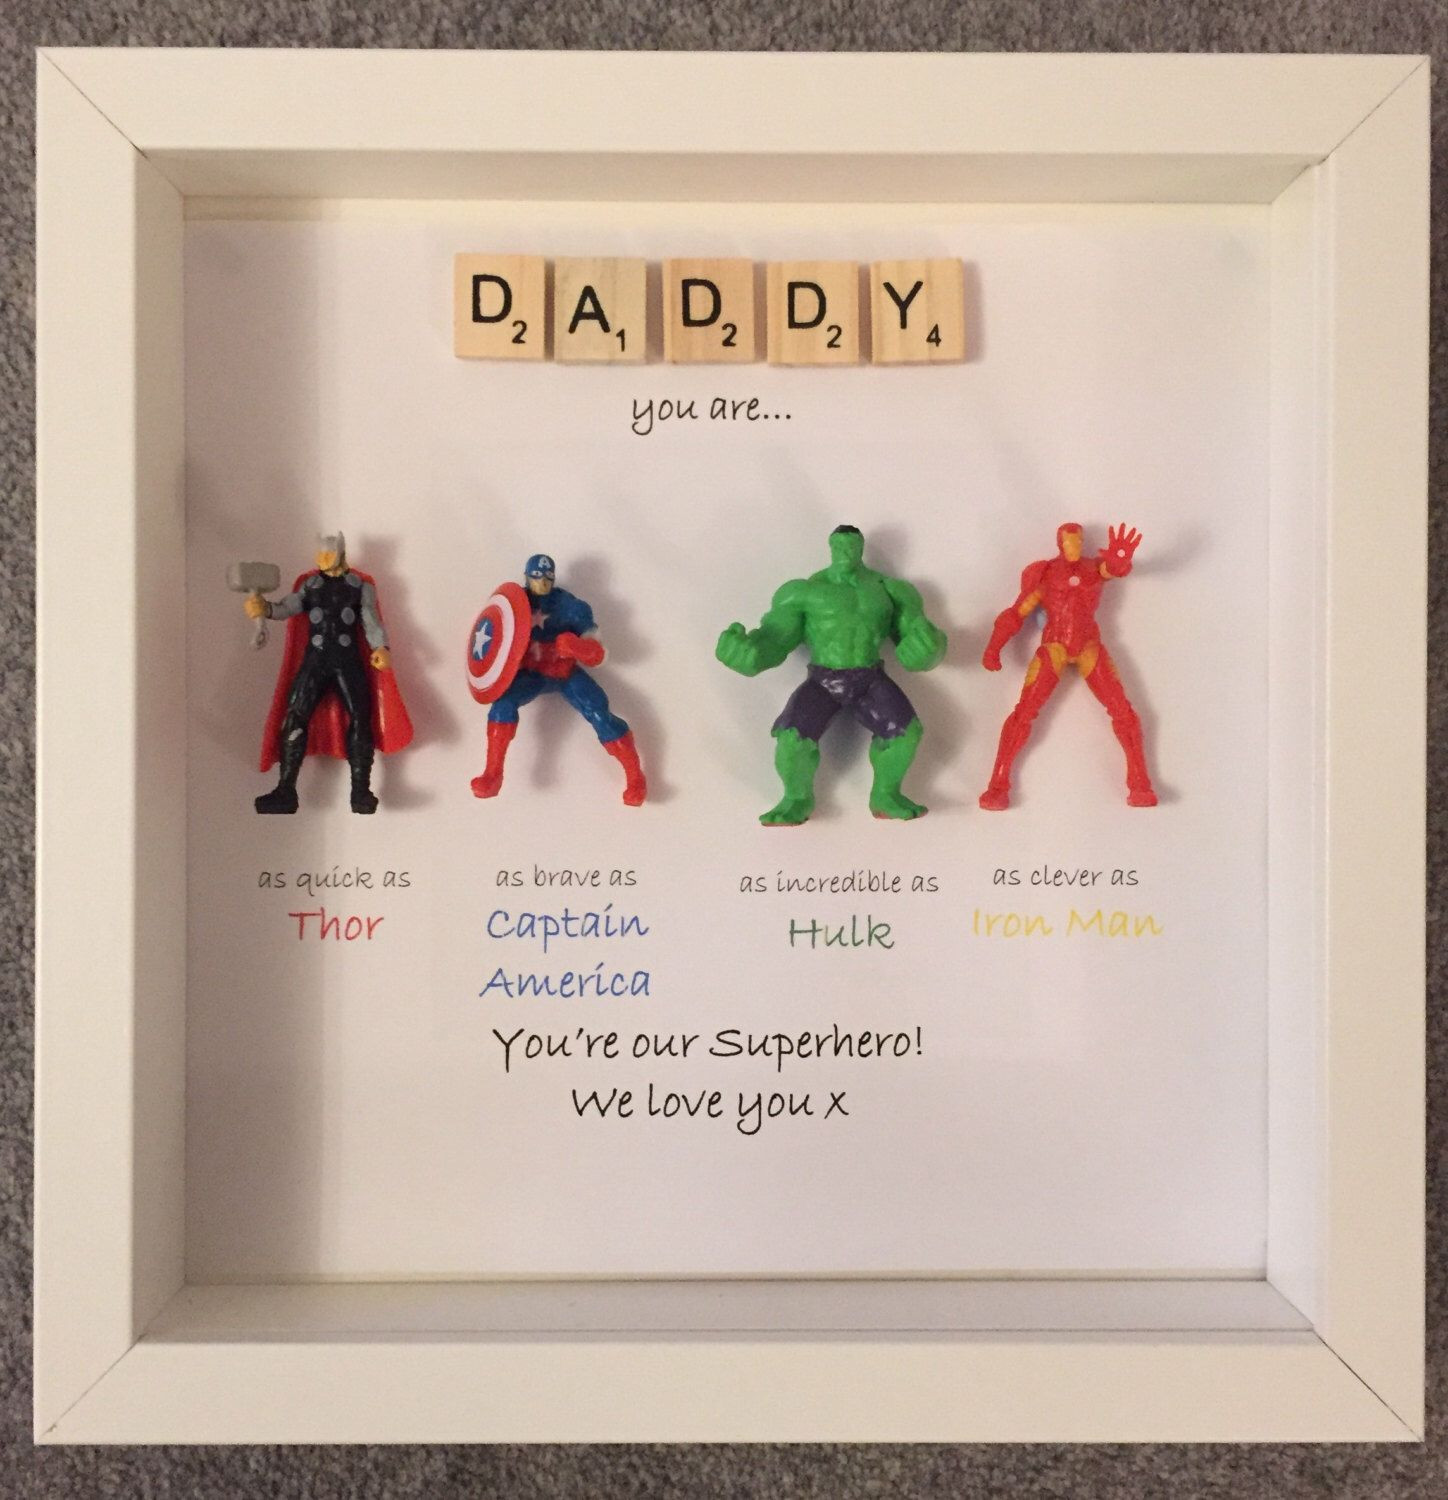 Gift Ideas For Dads Birthday From Daughter
 Avengers Superhero figures frame t Ideal for dad